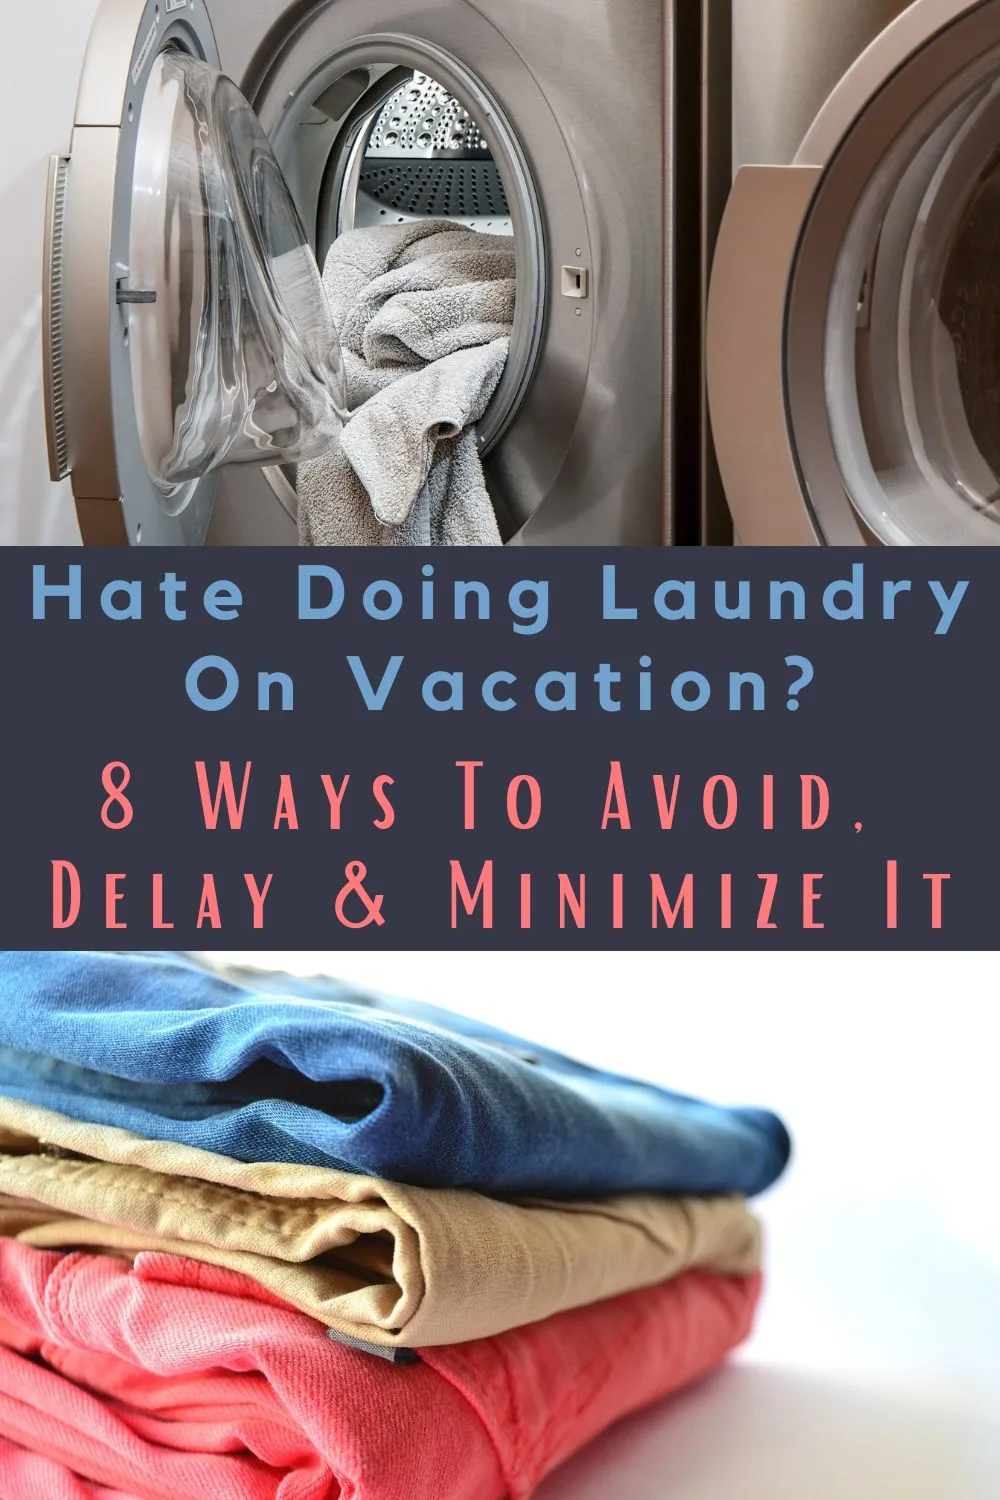 doing laundry on vacation is a sure way to kill the fun. here are 8 ways to put it off, farm it out or make it as easy as possible when you can't avoid it.